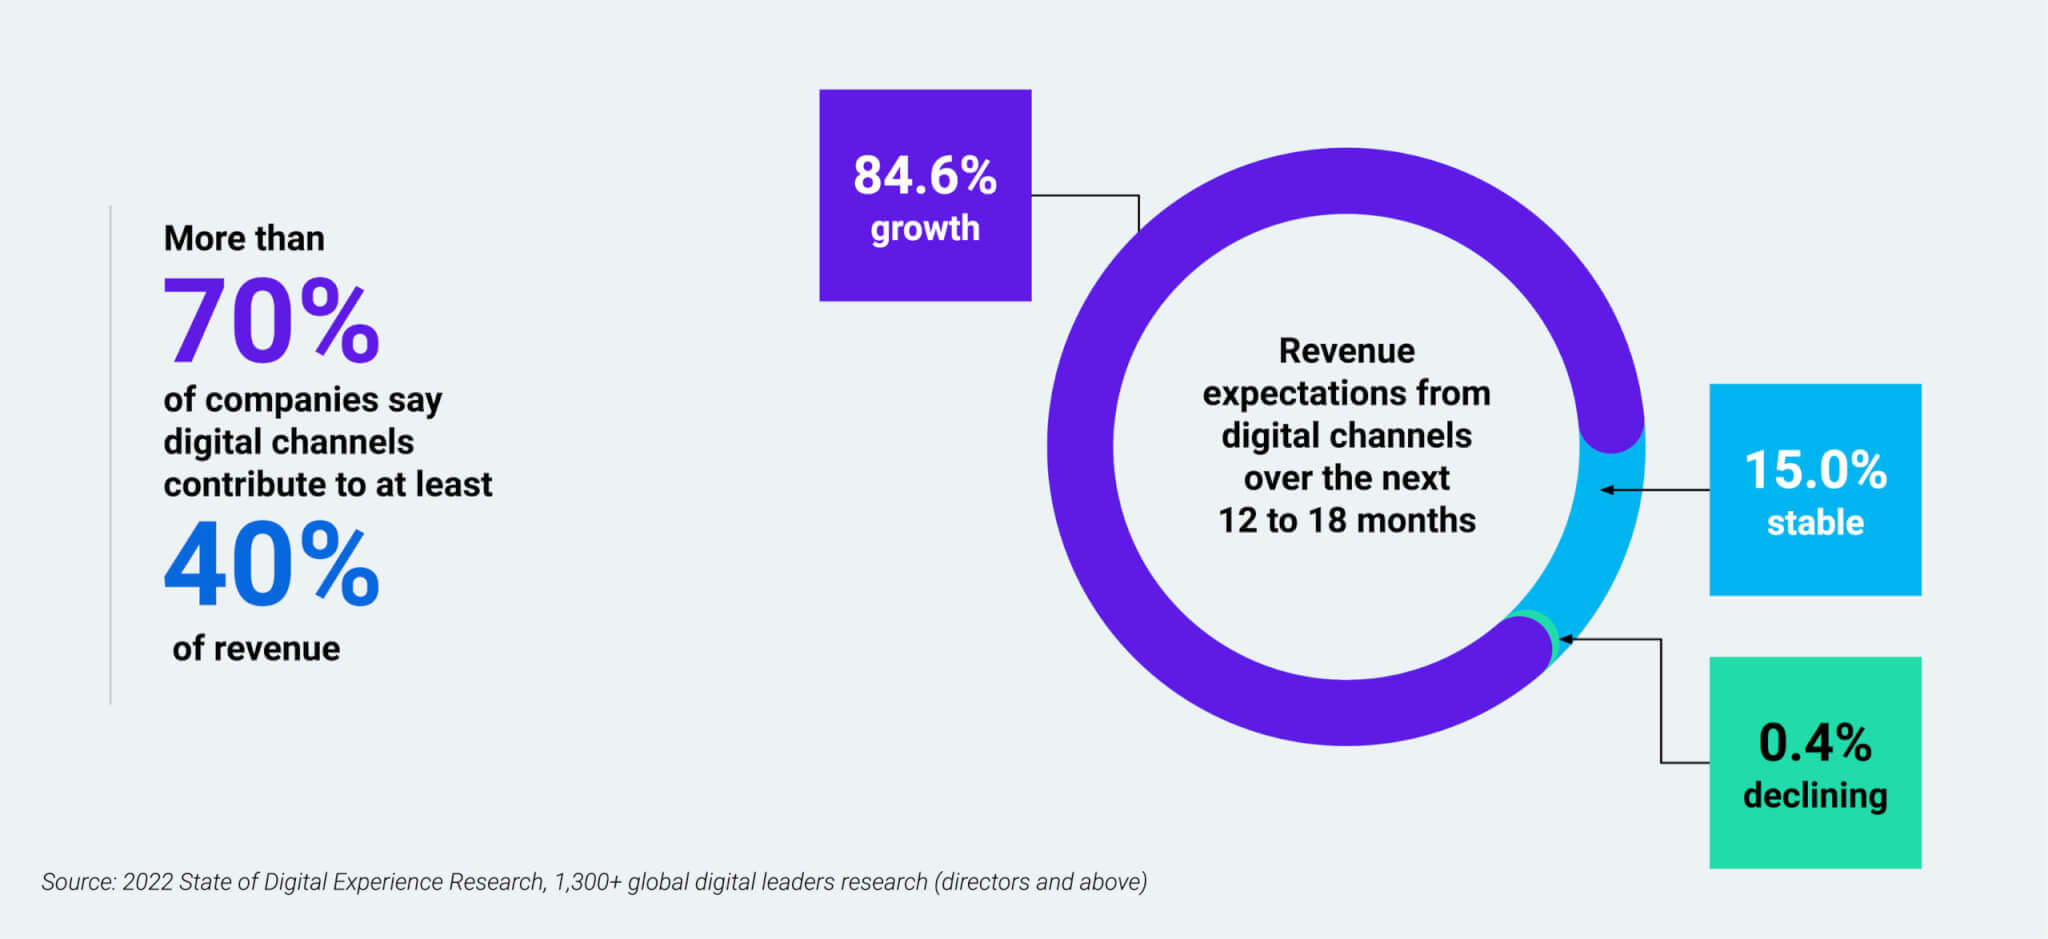 Revenue is the leading business metric